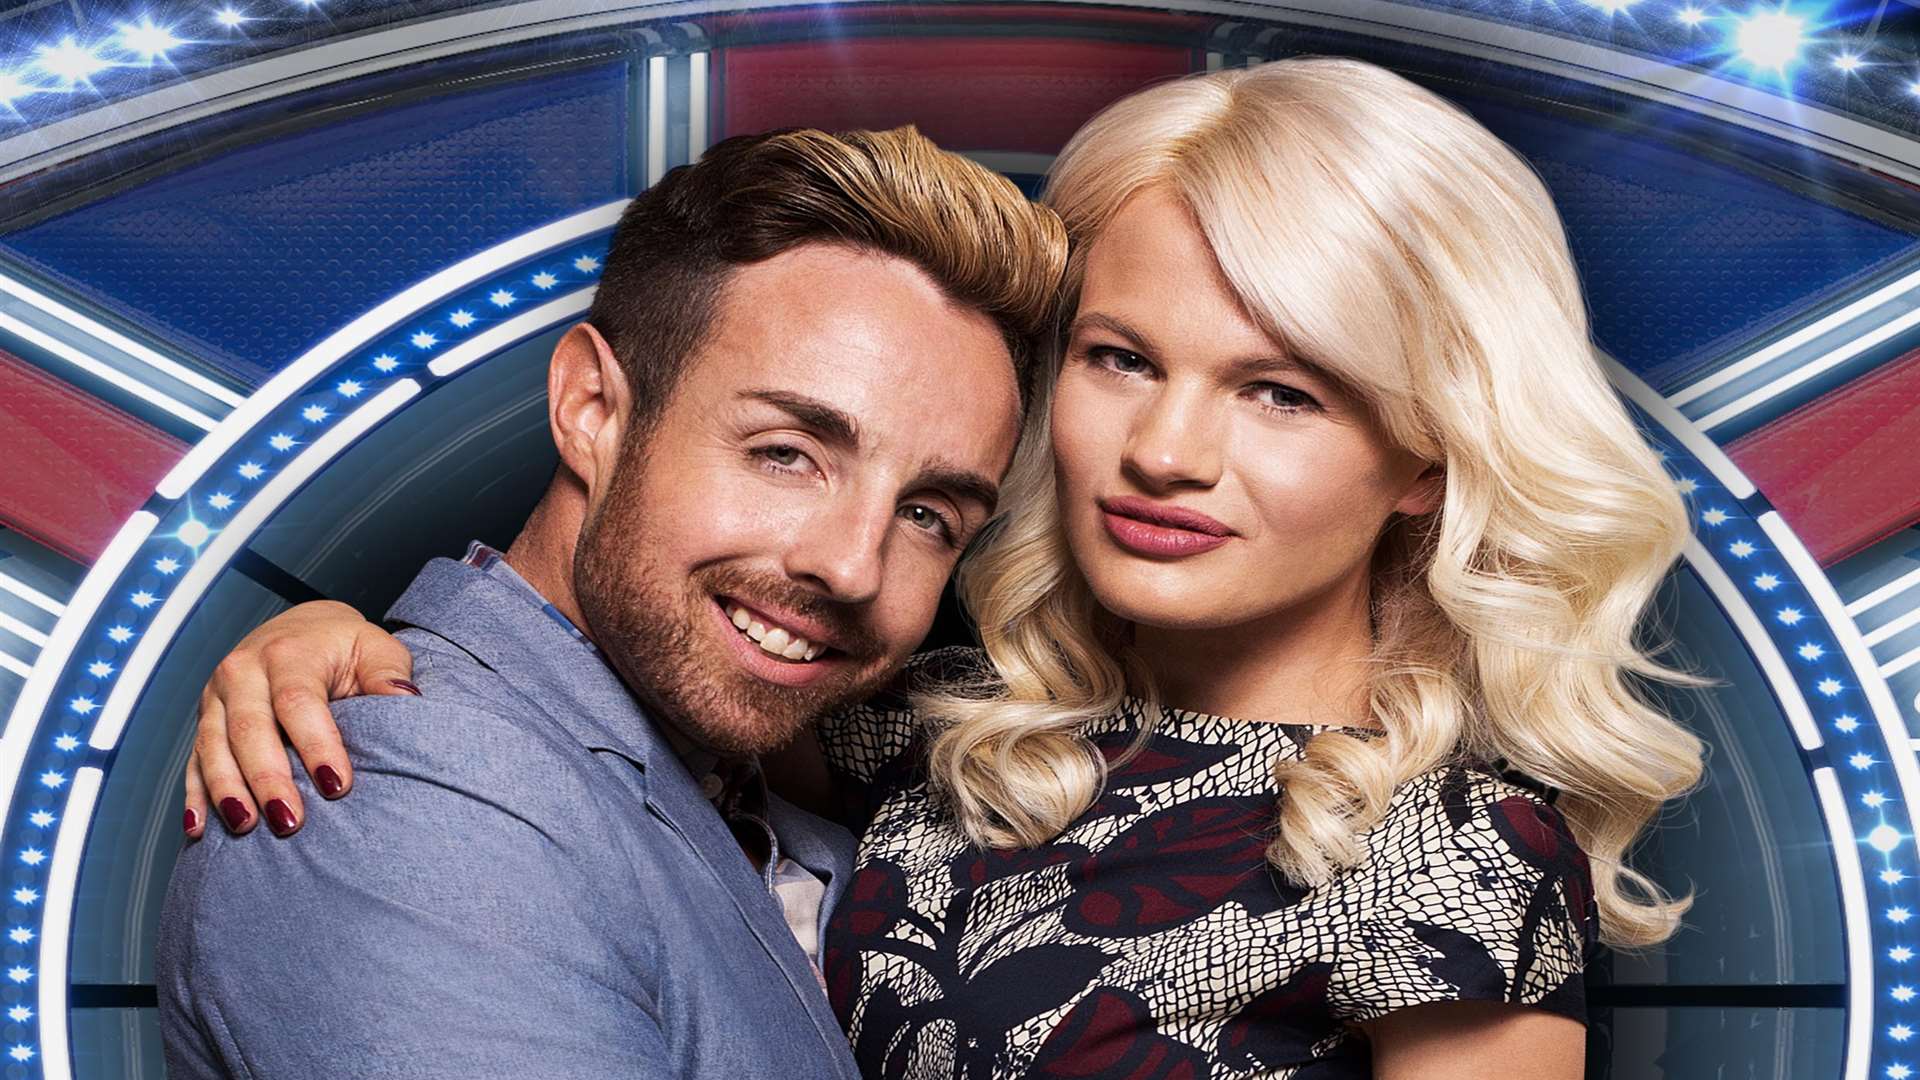 Stevi Richie and Chloe Jazmine, entered the Big Brother house